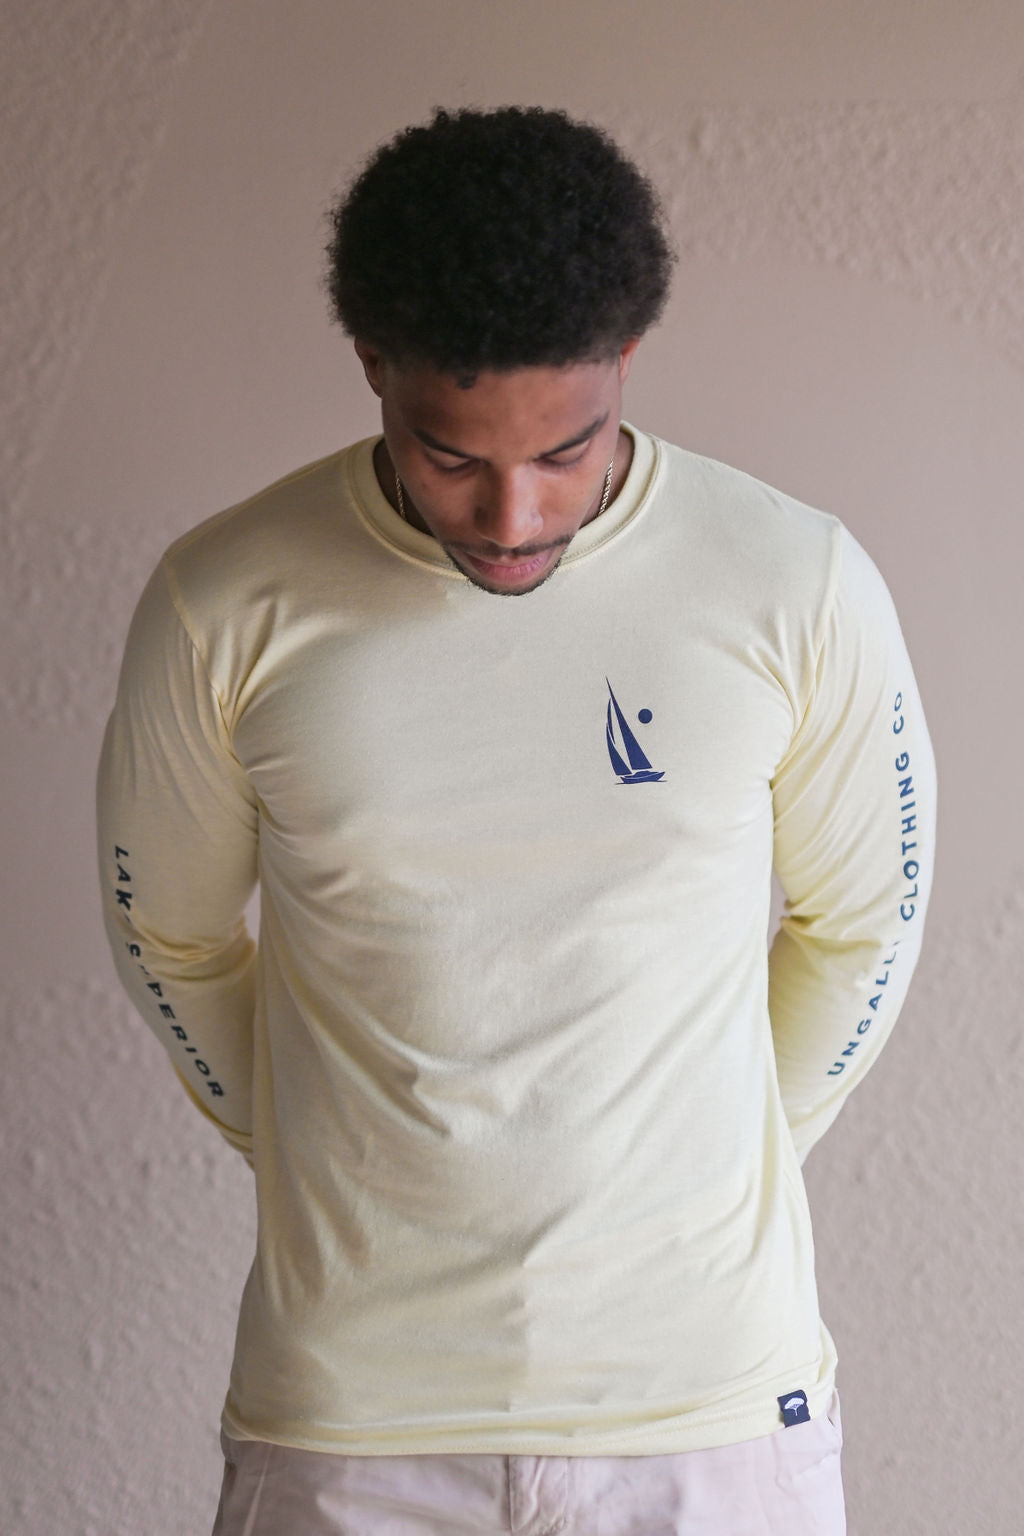 Unisex long sleeve organic shirt with blue sail boat logo and text